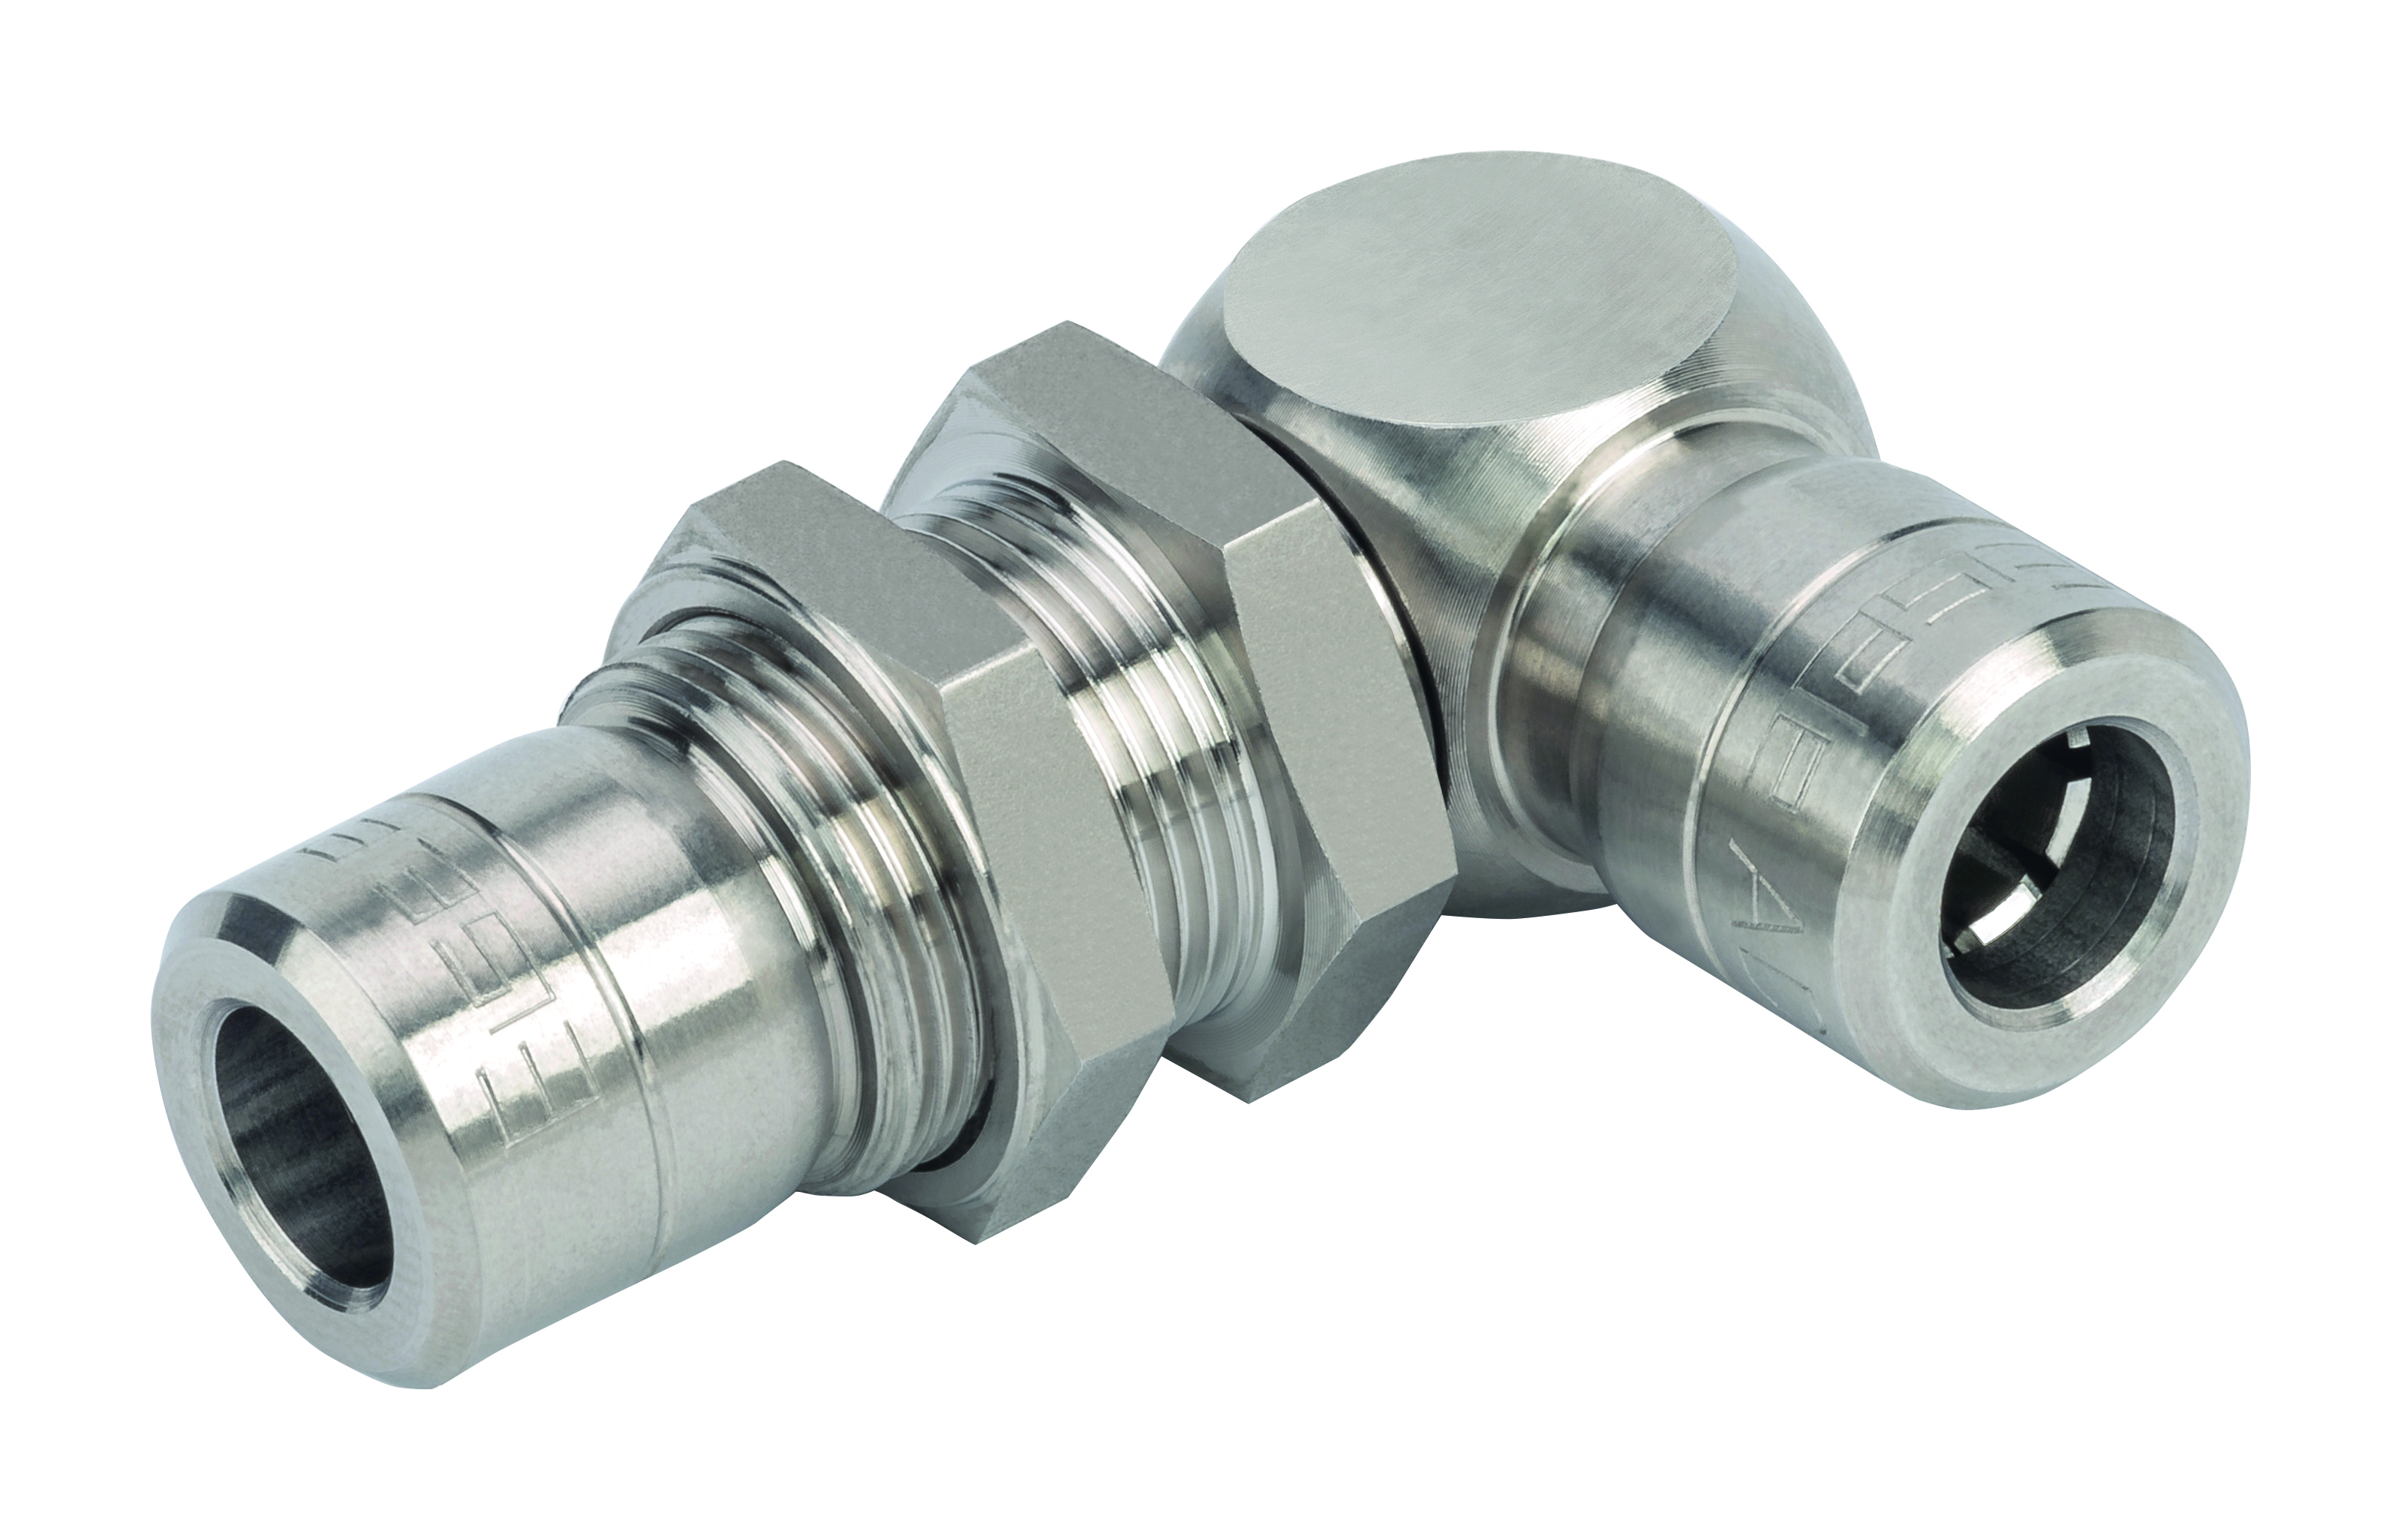 Swivel Bulkhead Elbow Push To Connect Connector, Stainless STl, Inch - INOXLINE©